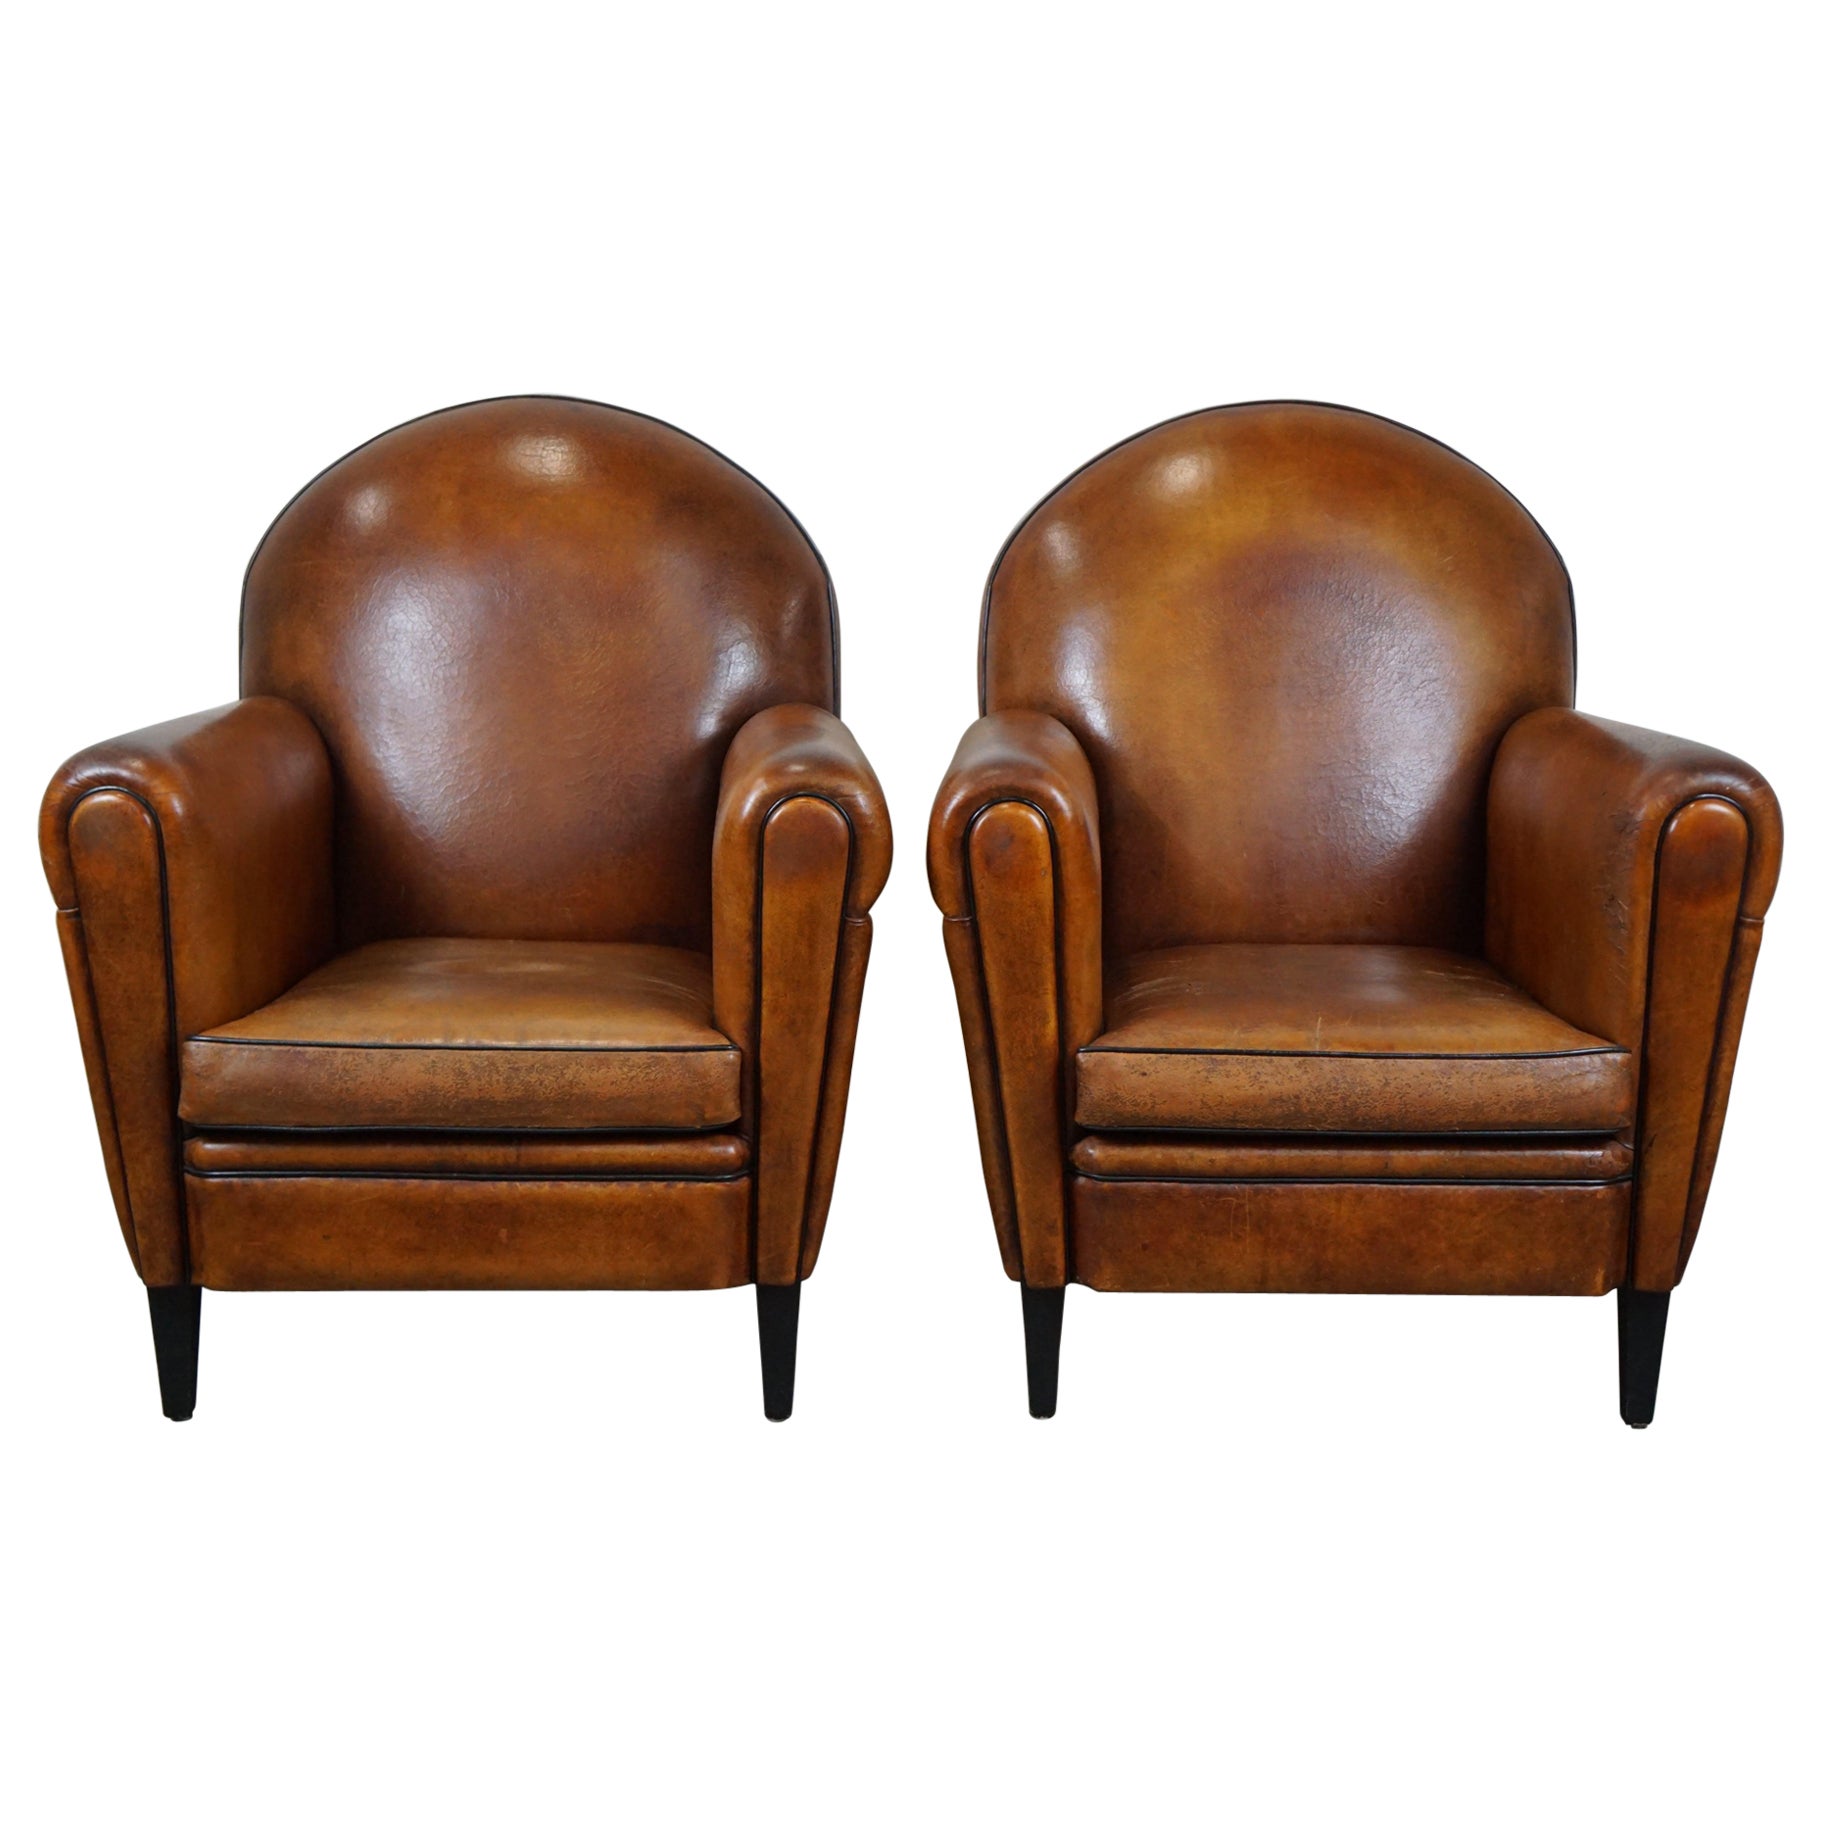 Set of two sheep leather Art Deco style design armchairs with a beautiful patina